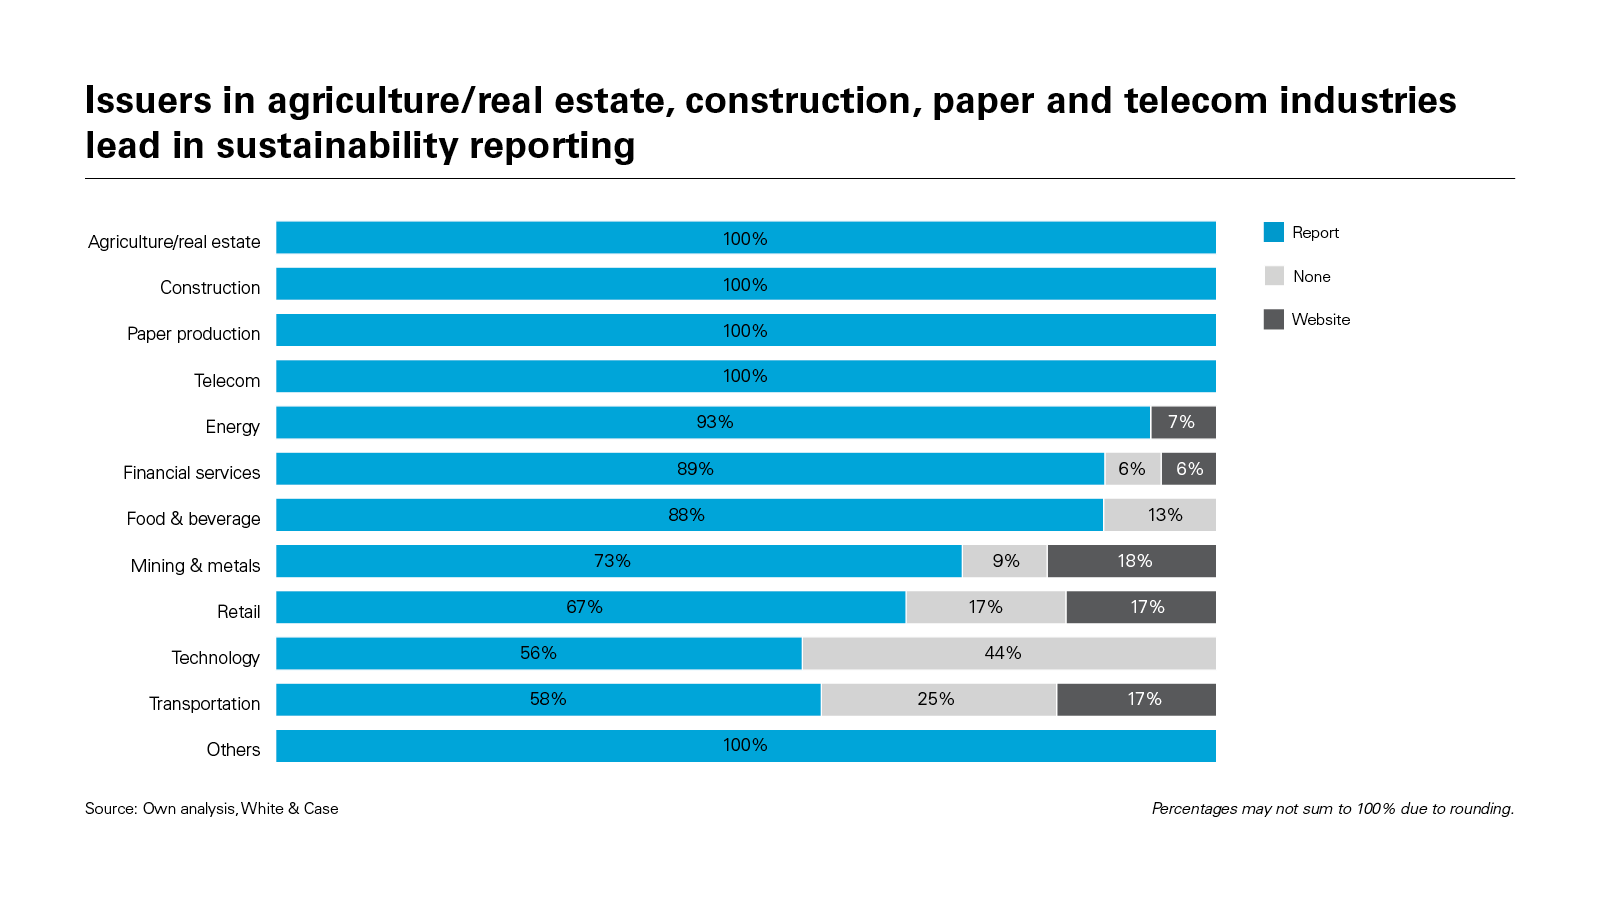 Issuers in agriculture/real estate, construction, paper and telecom industries lead in sustainability reporting